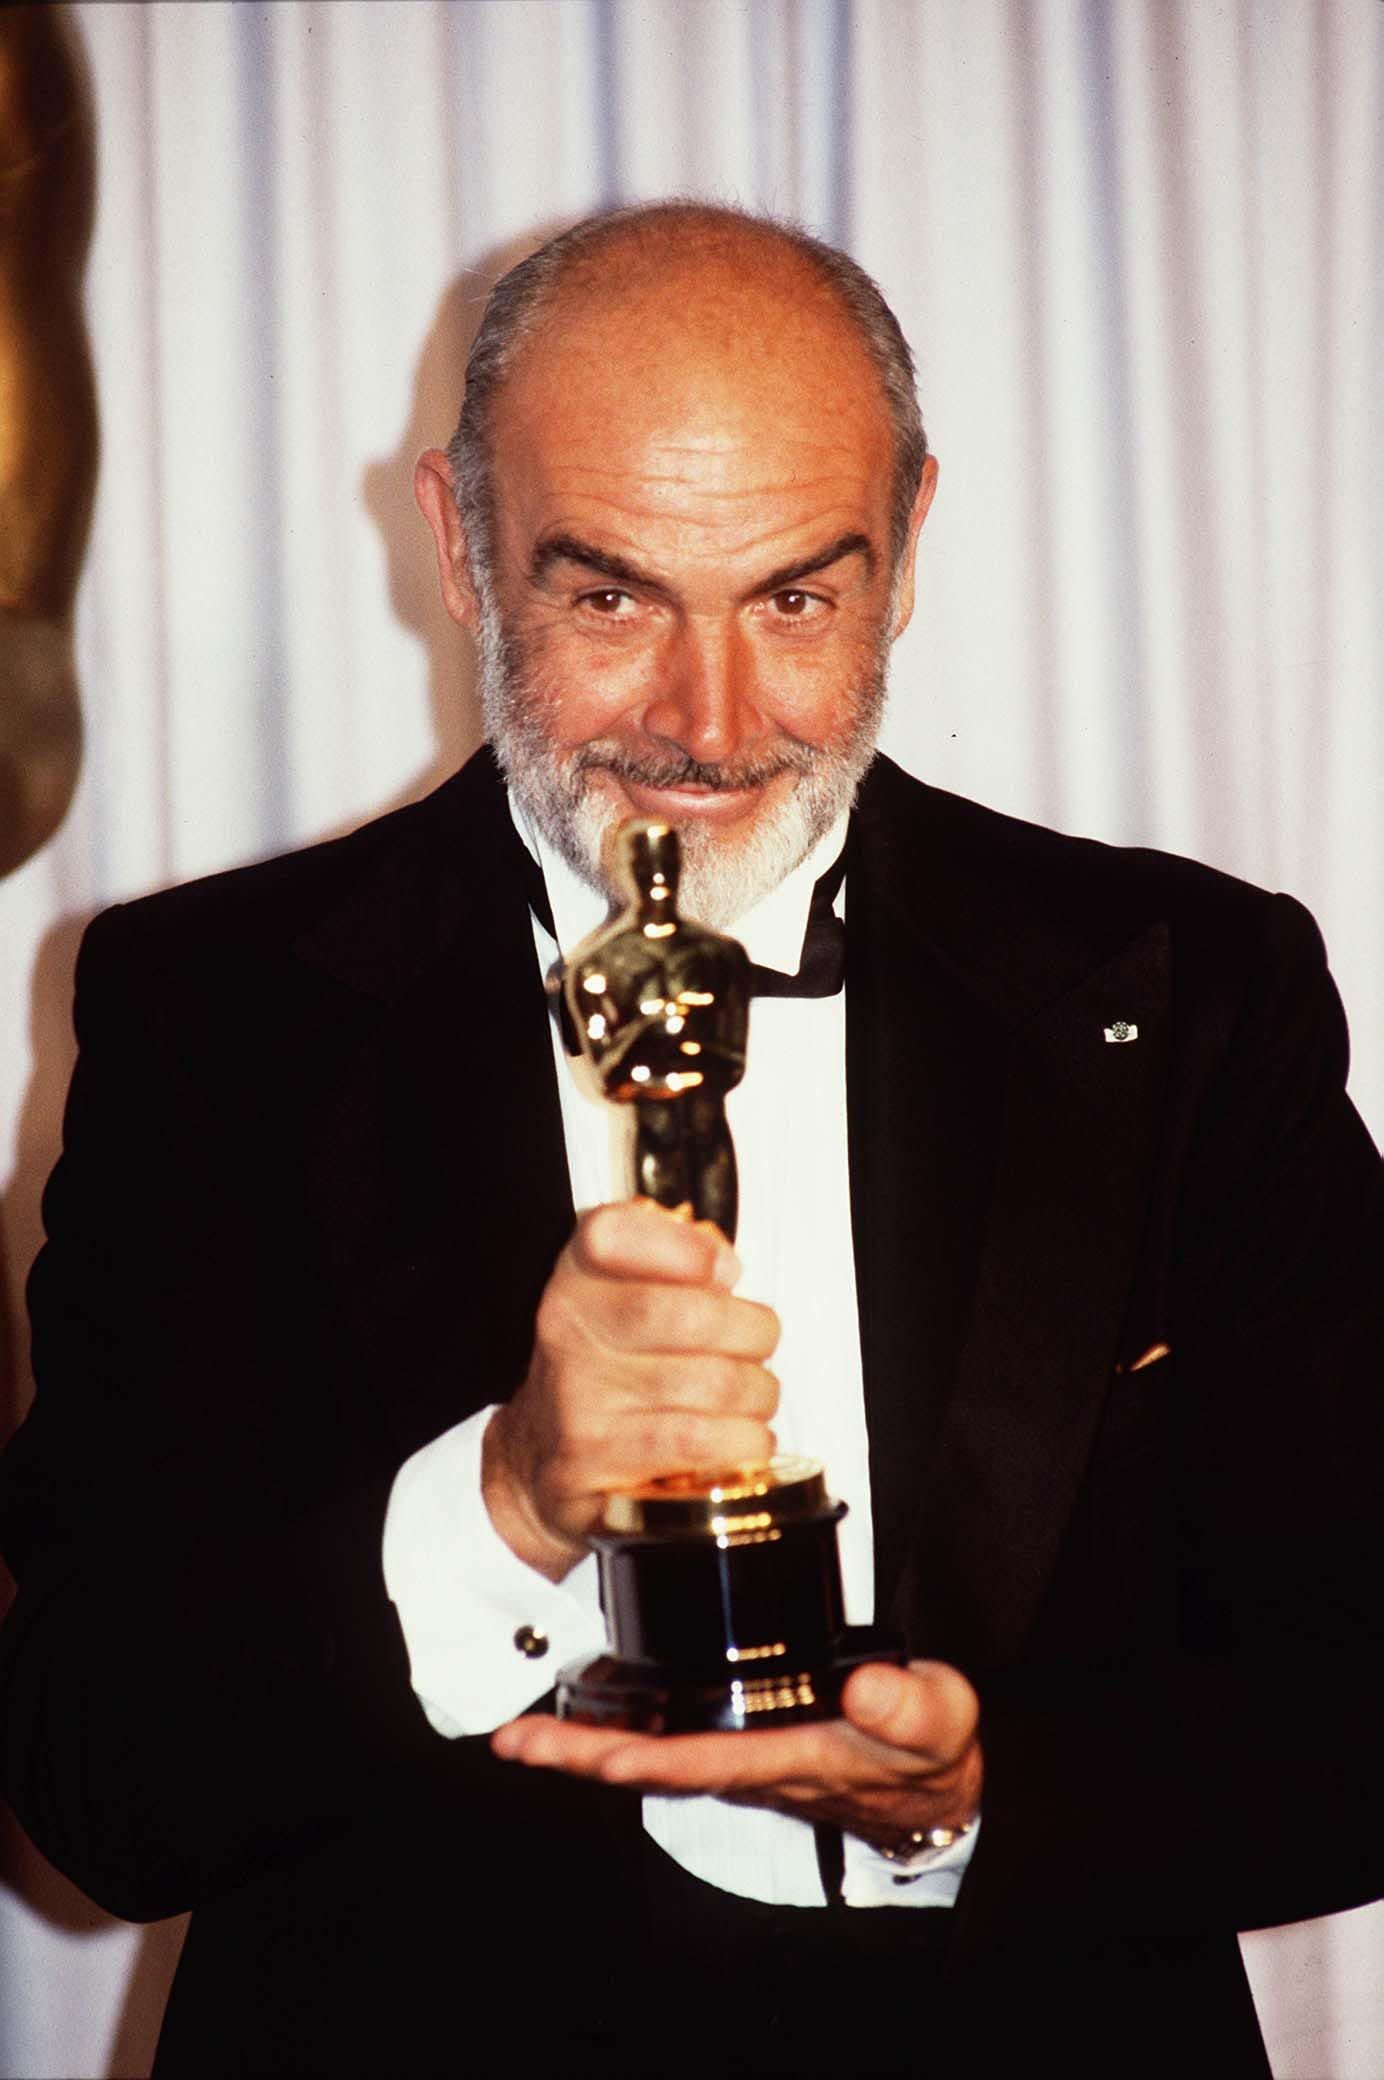 Scottish Actor Sean Connery holding an Academy Award for Best Actor in a Supporting Role iduring the 1988 Oscars Ceremony | Photo: Getty Images